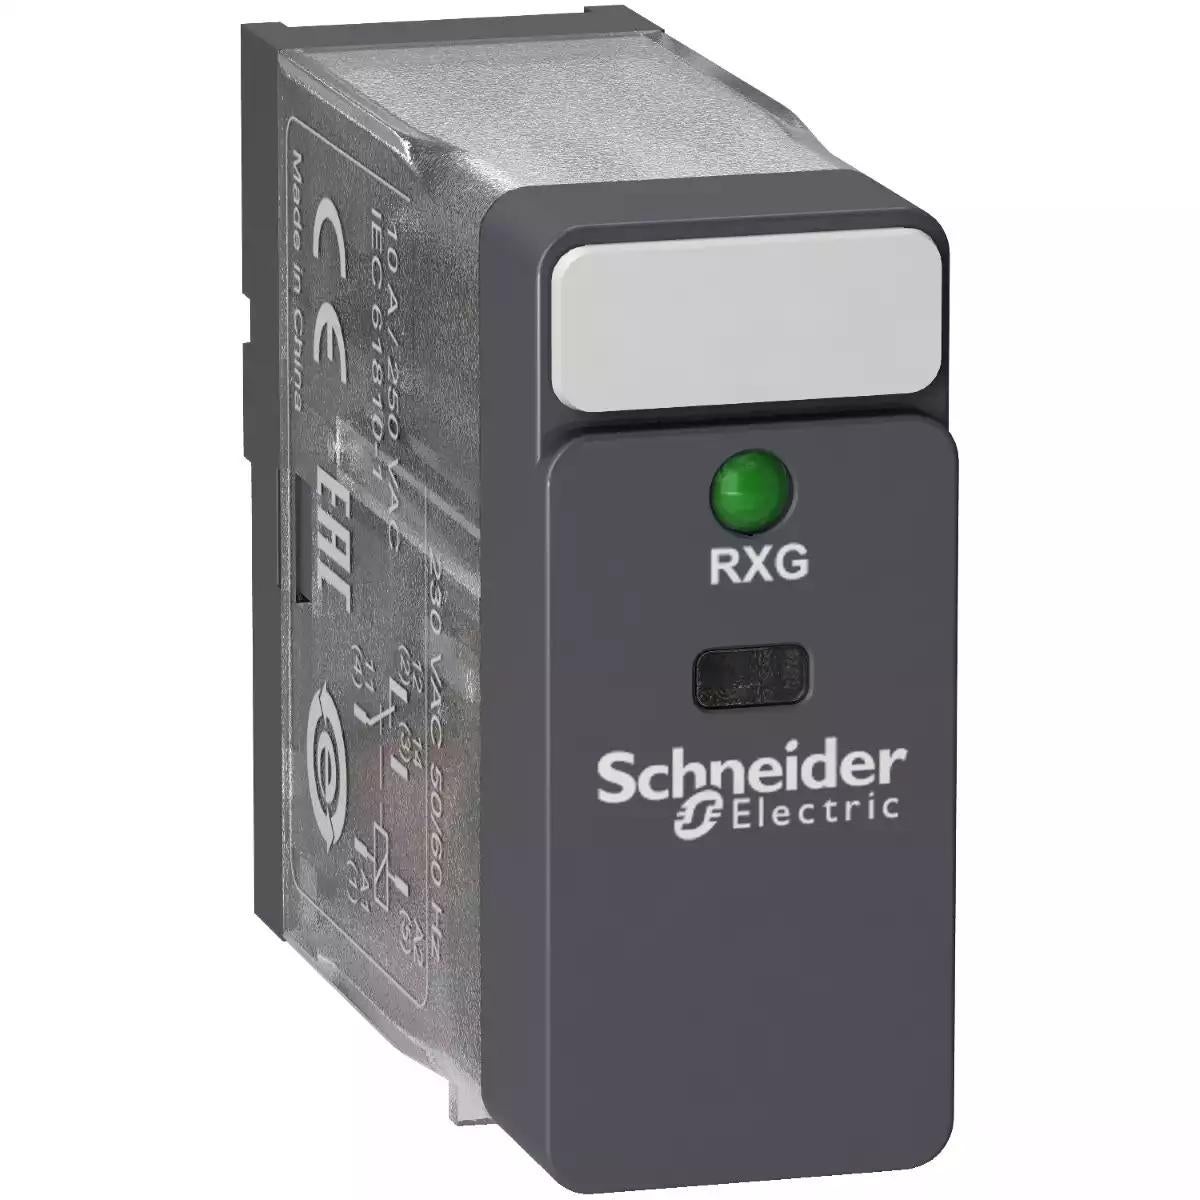 Schneider Electric interface plug-in relay - Zelio RXG - 1 C/O standard - 230 V AC - 10 A -with LED